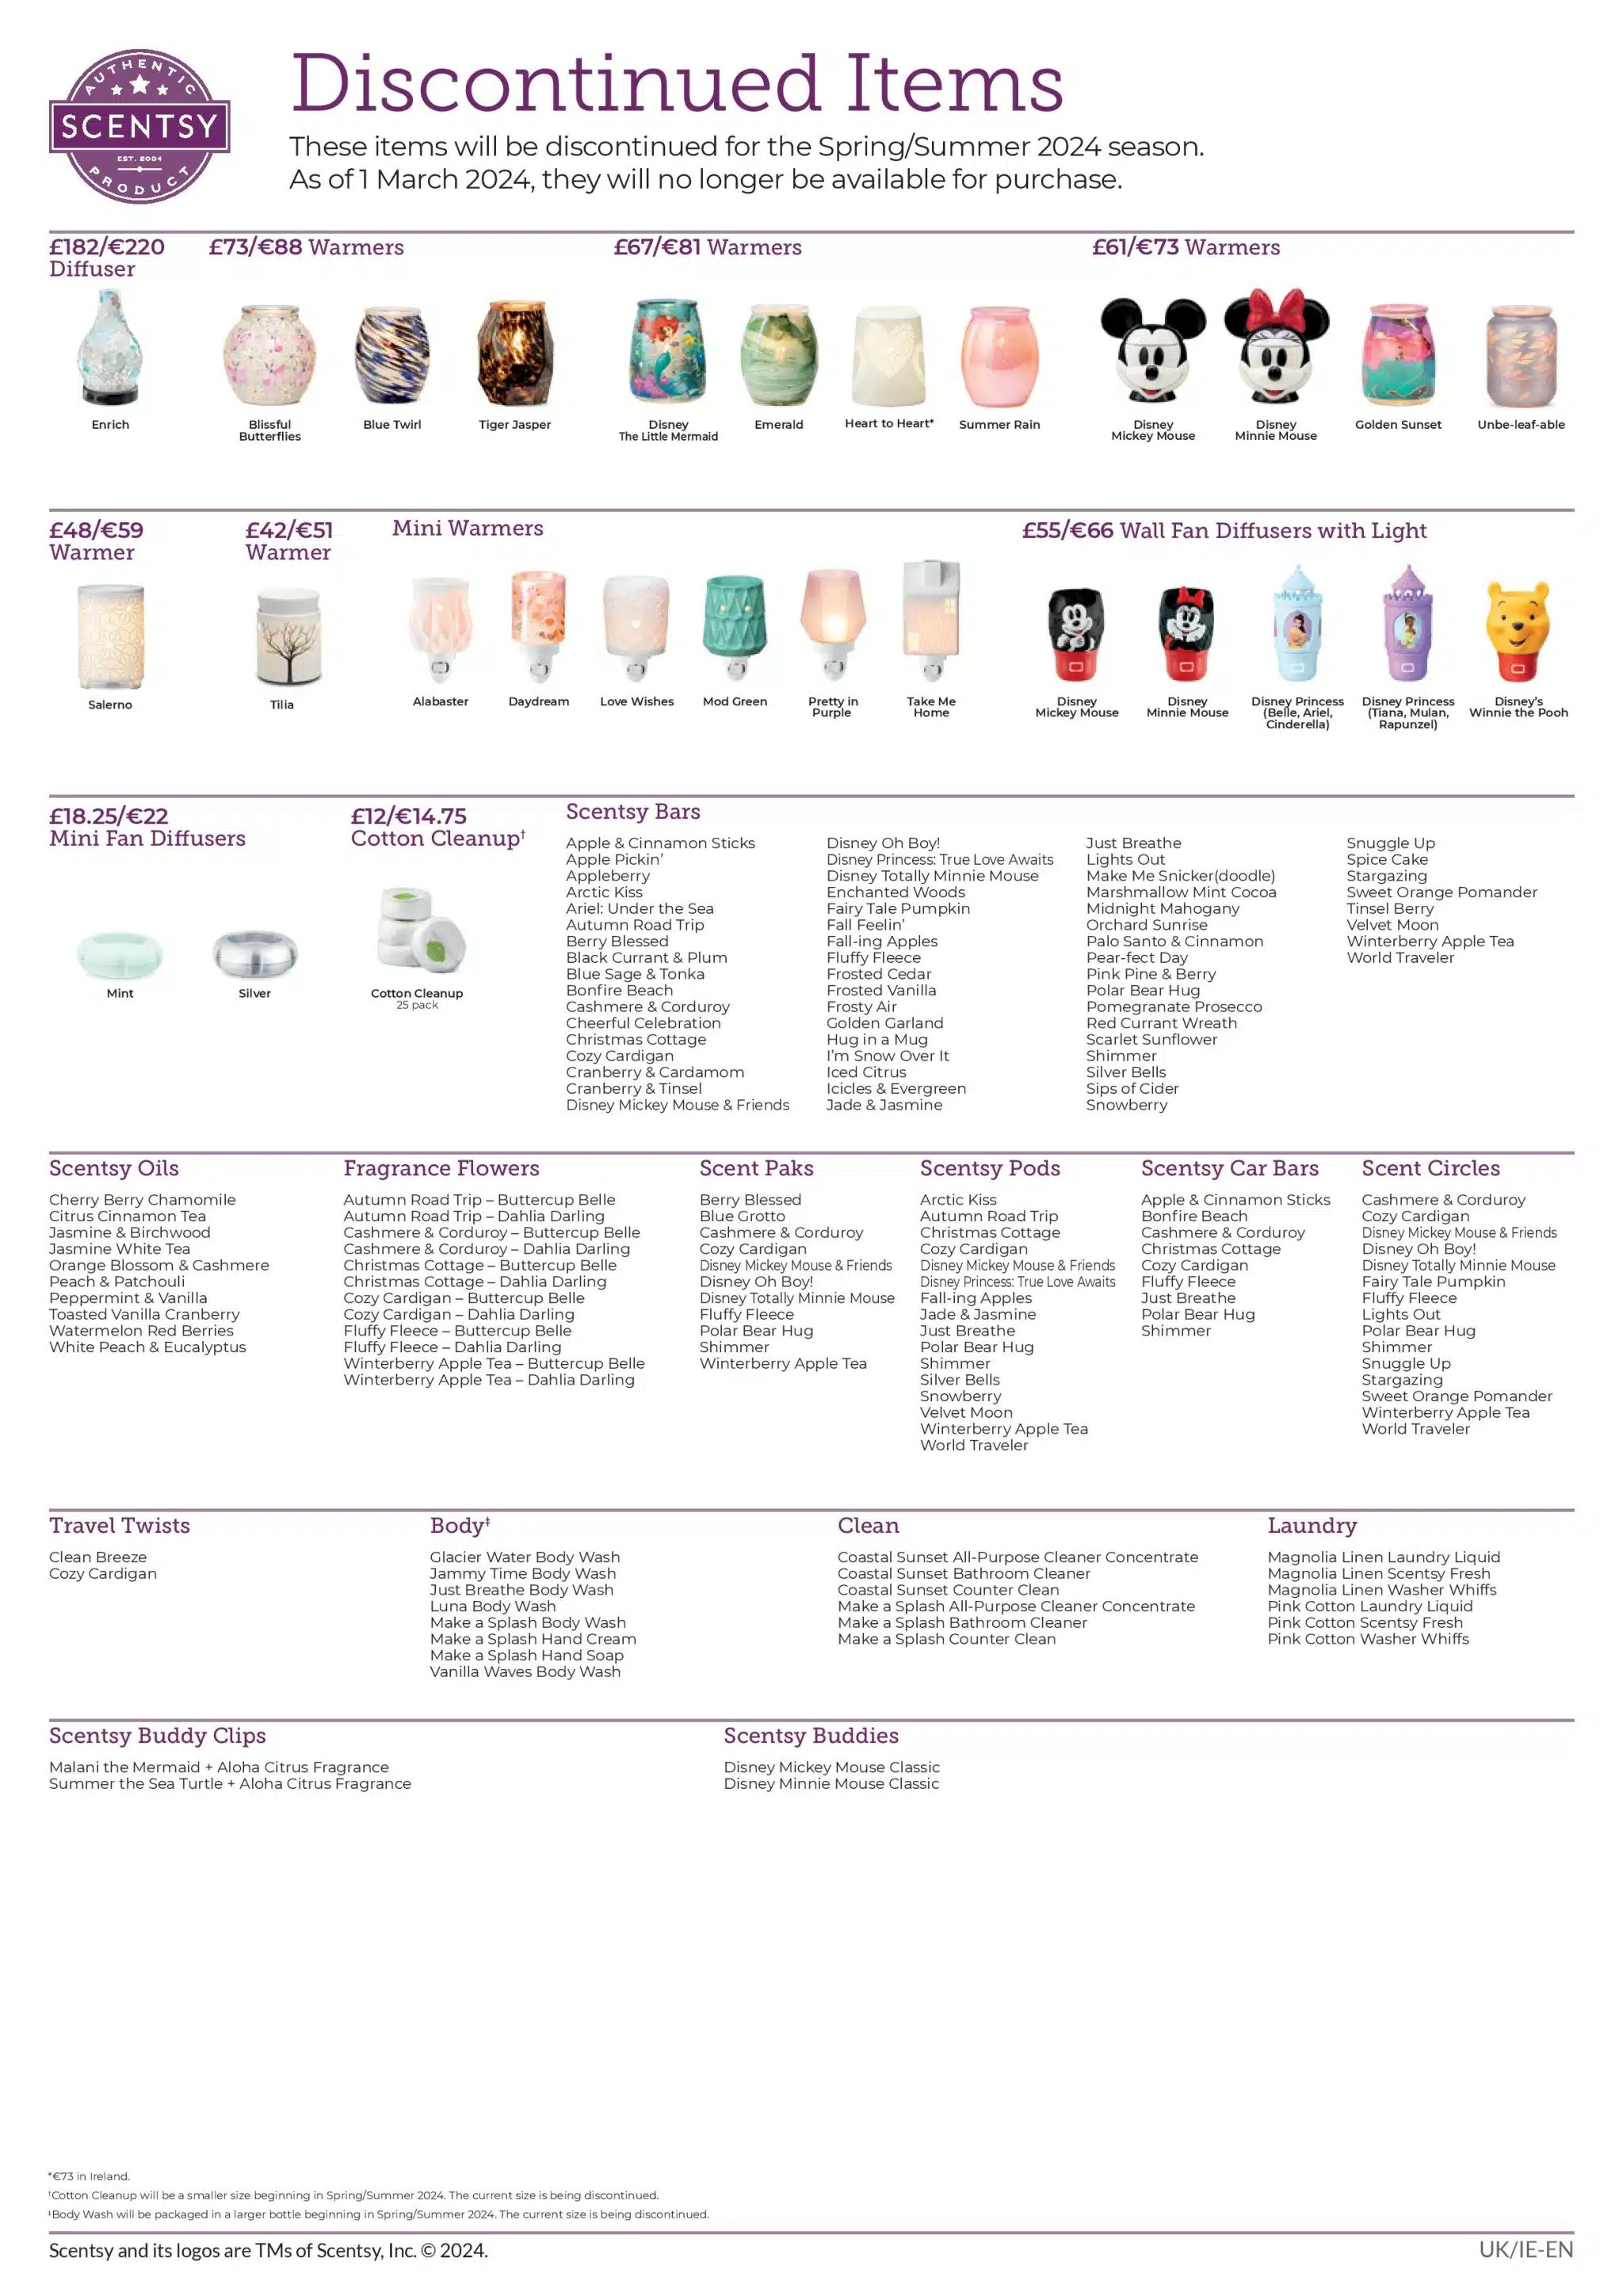 Scentsy UK & Europe Discontinued List - For Spring Summer 2024